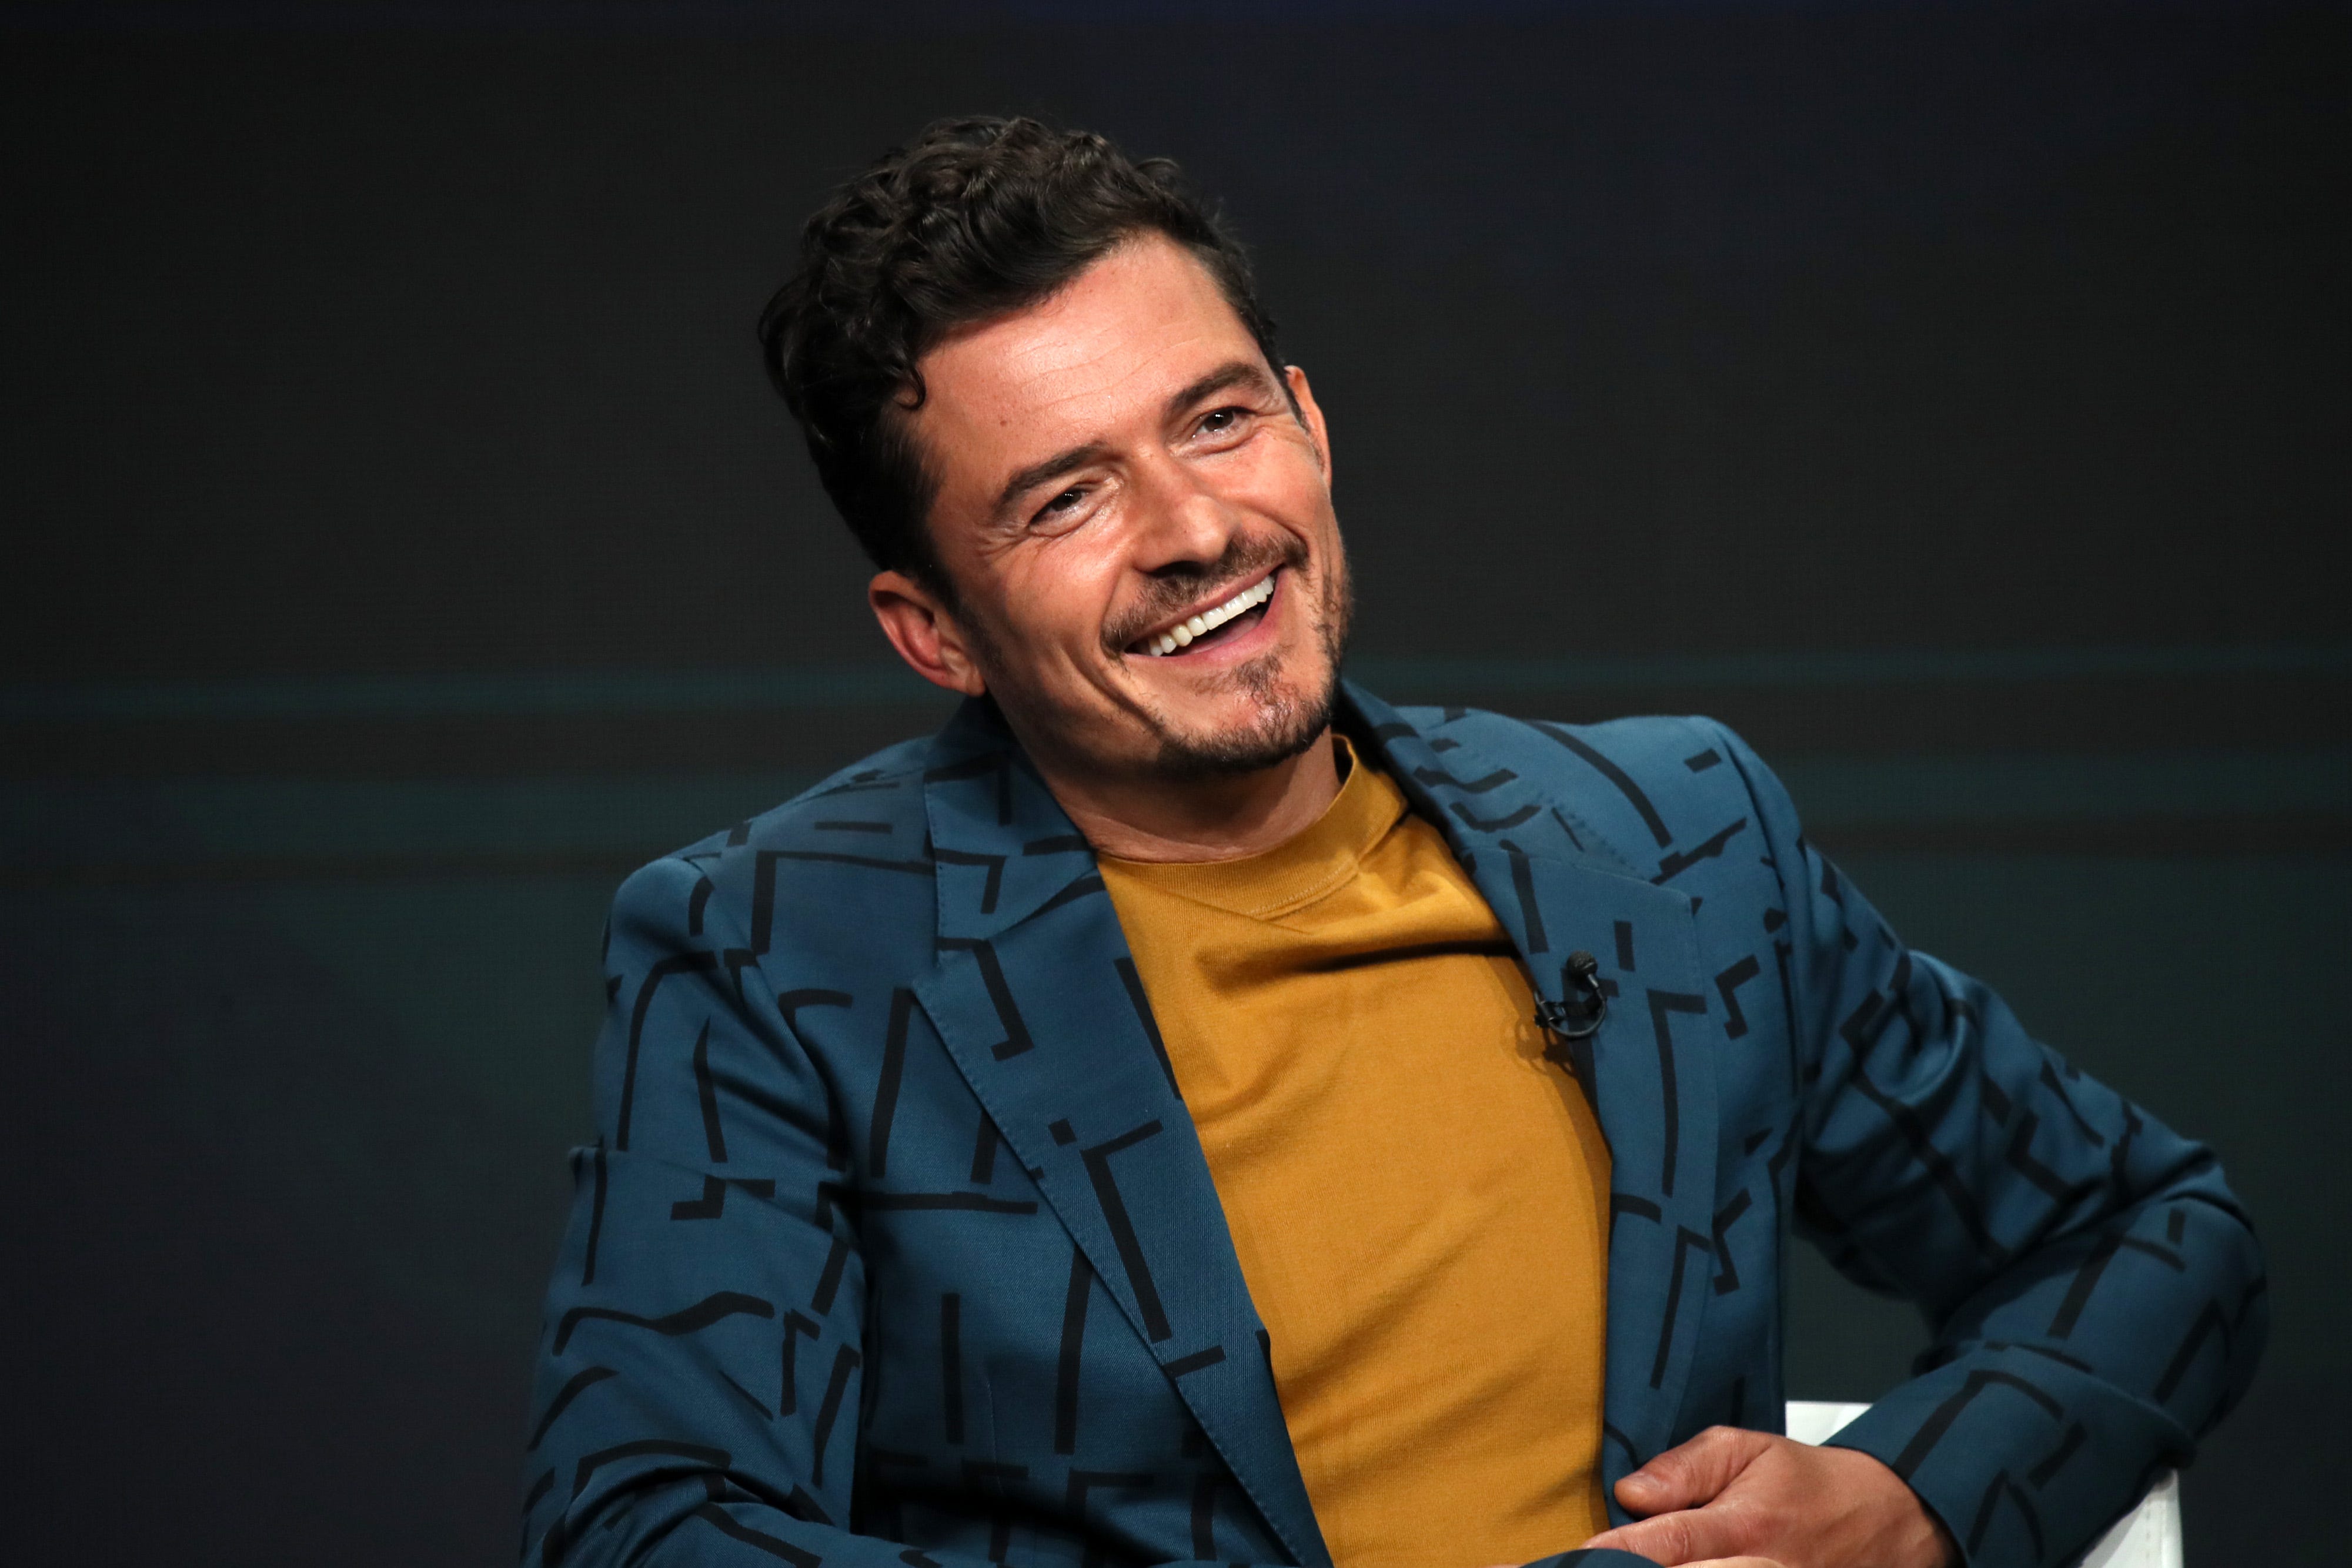 Orlando Blooms Comments About His Naked Paddle Boarding 